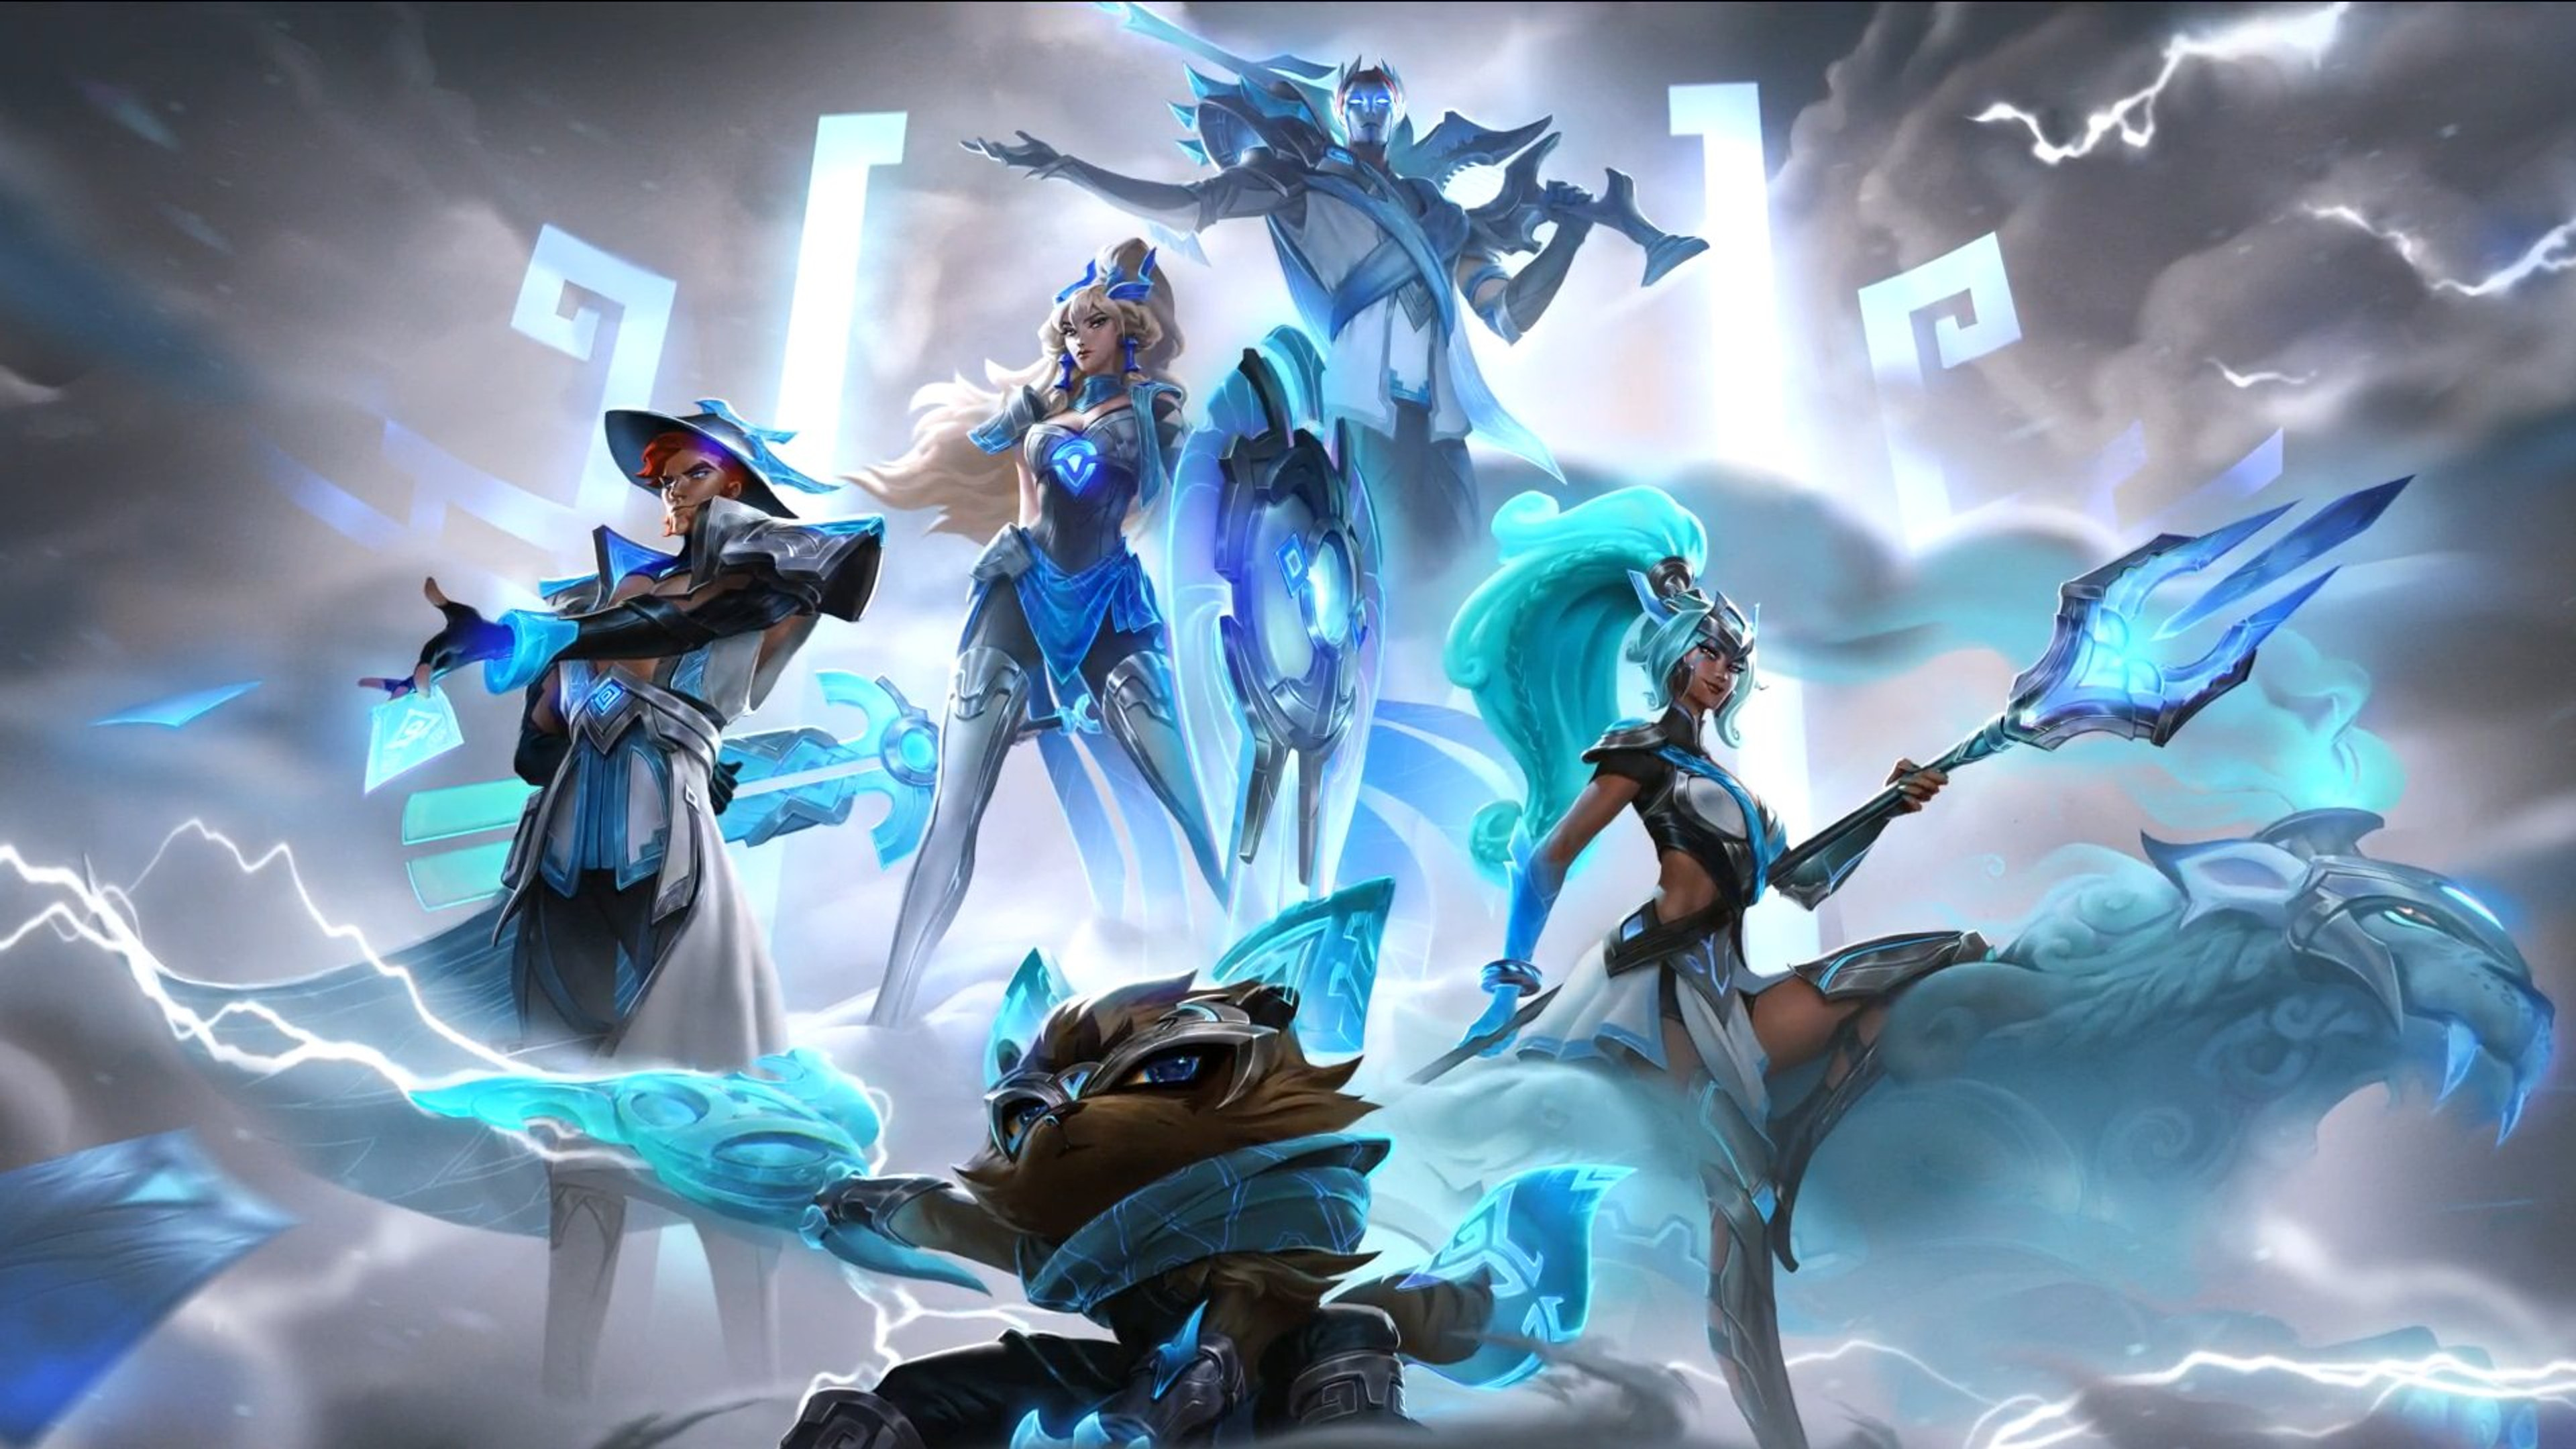 skins-damwon-gaming-worlds-league-legends-kennen-leona-jhin-nidalee-twisted-fate